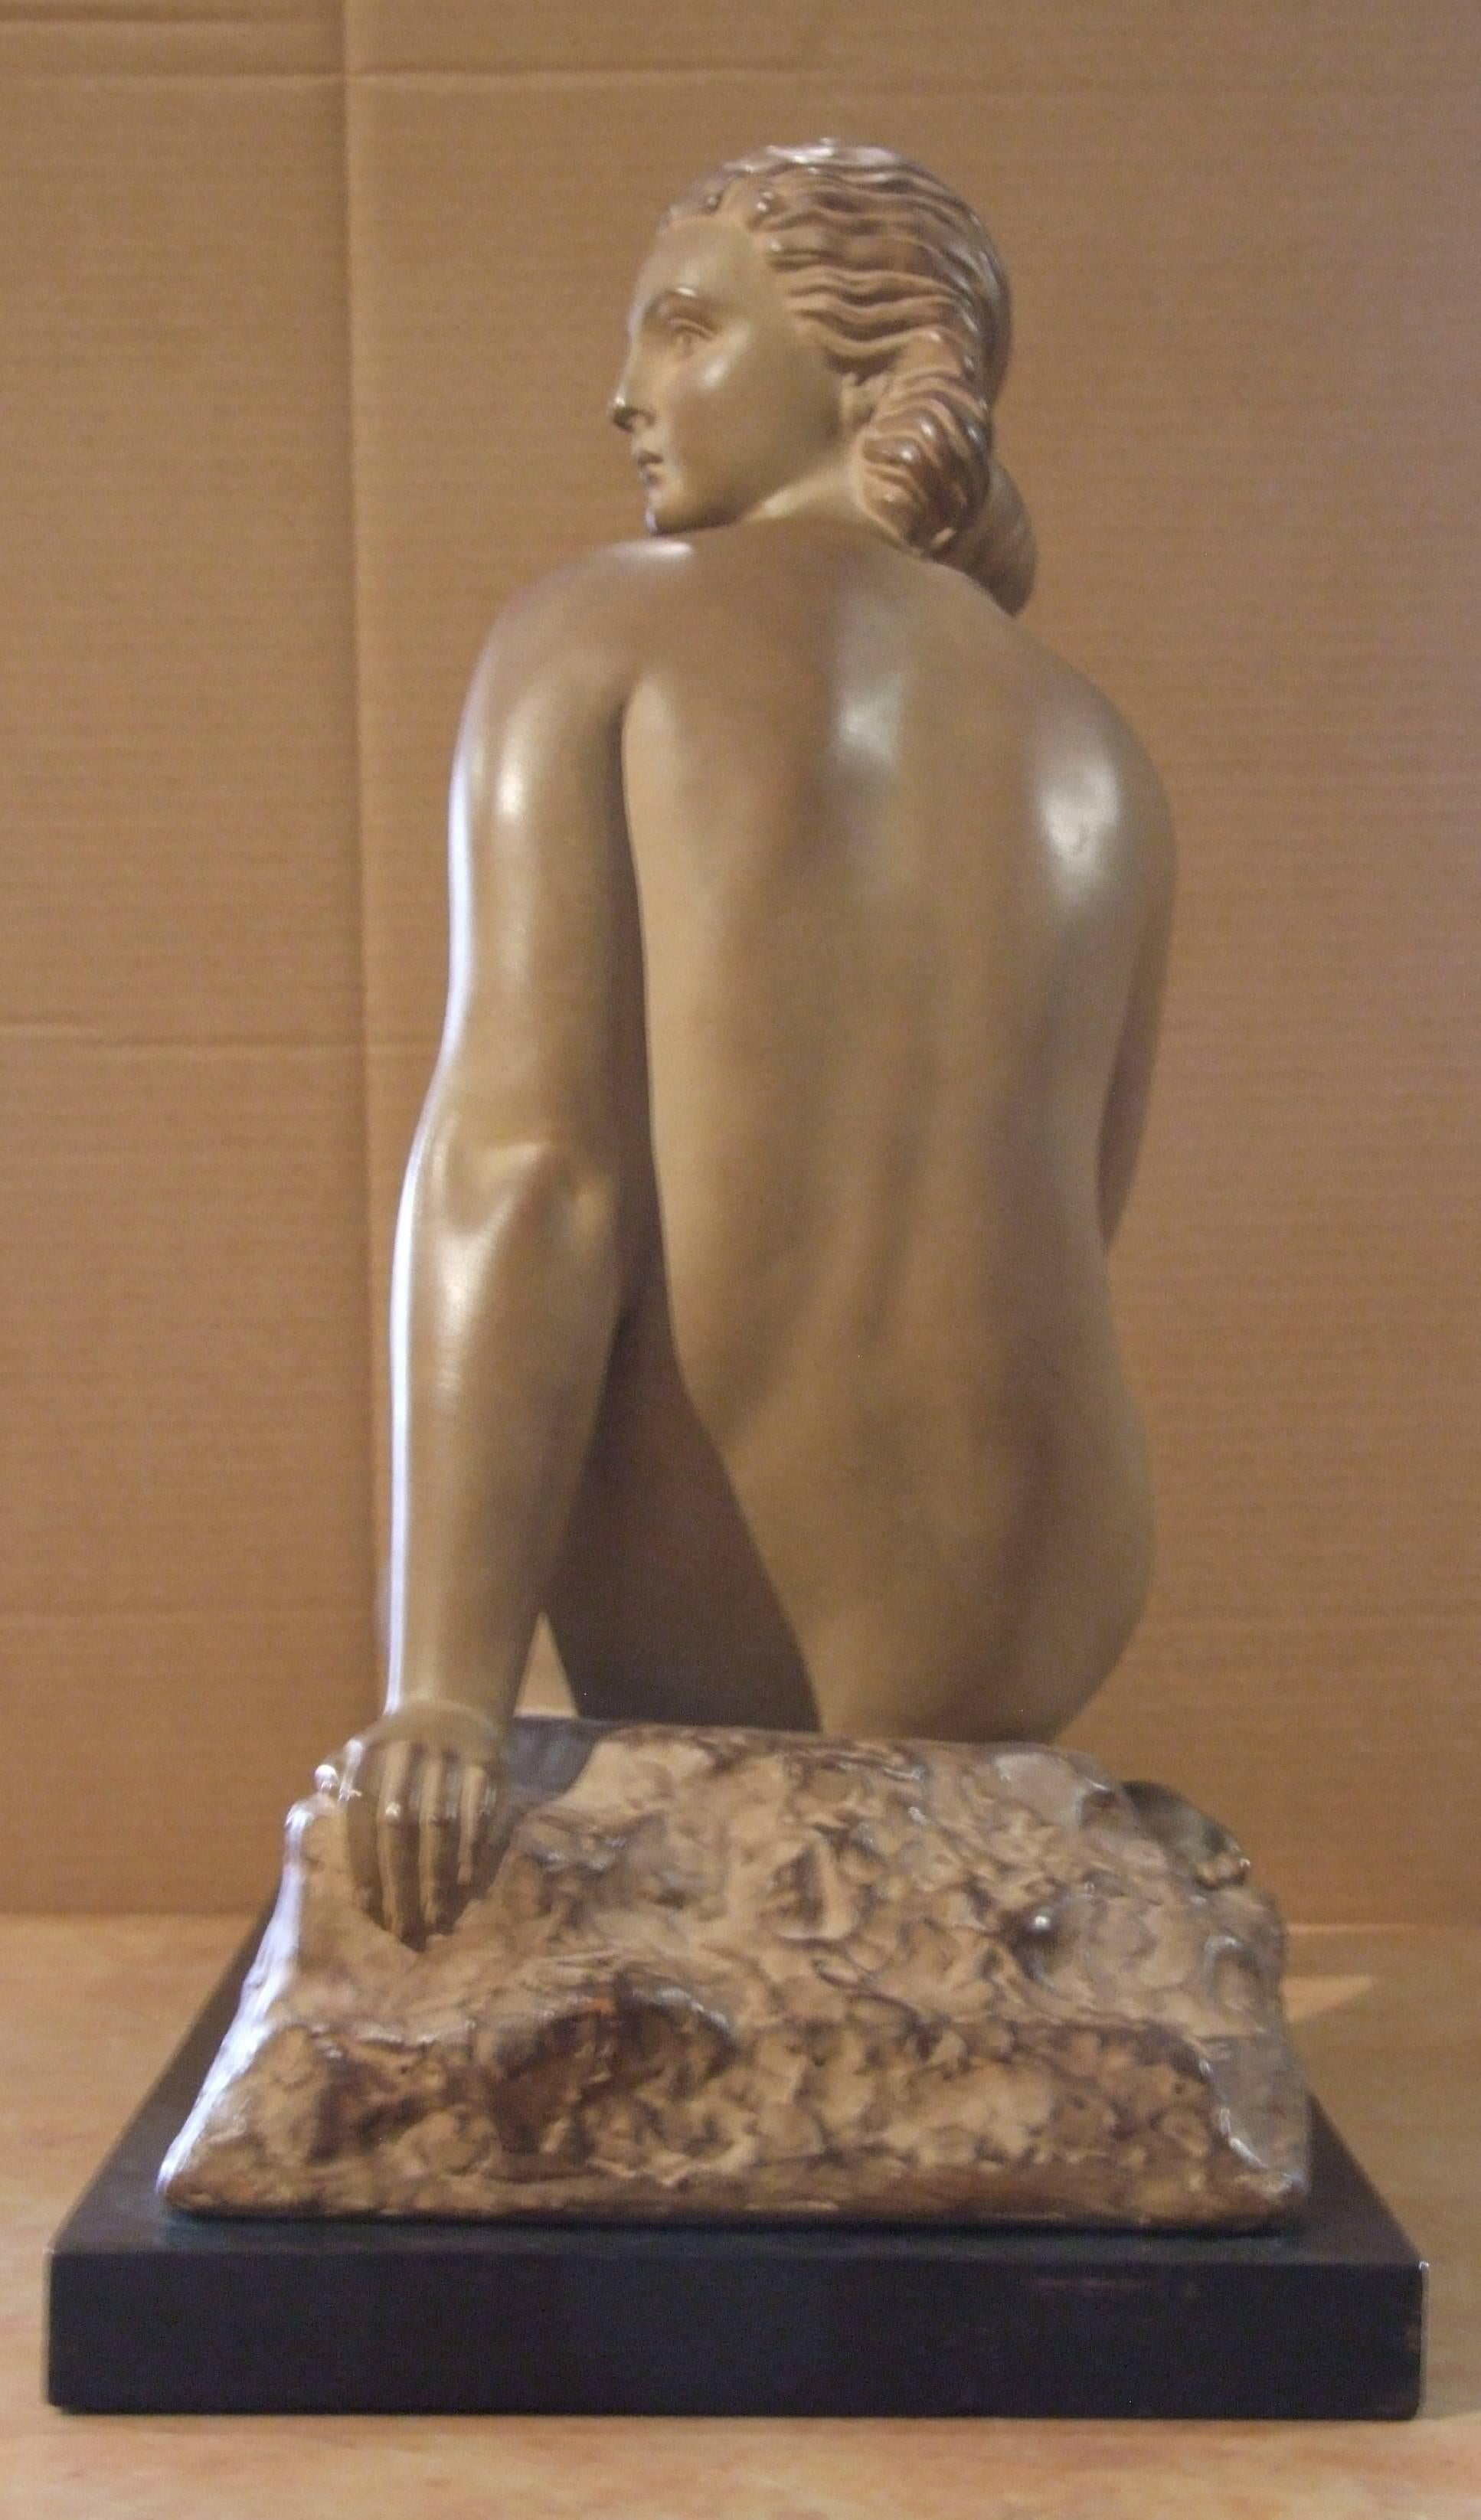 A rare sculpture made of clay by Demeter Chiparus, representing a sit nude woman.
Signed on the sculpture. On a wood basement.

Demétre Haralamb Chiparus (16 September 1886 – 22 January 1947) was a Romanian Art Deco era sculptor who lived and worked